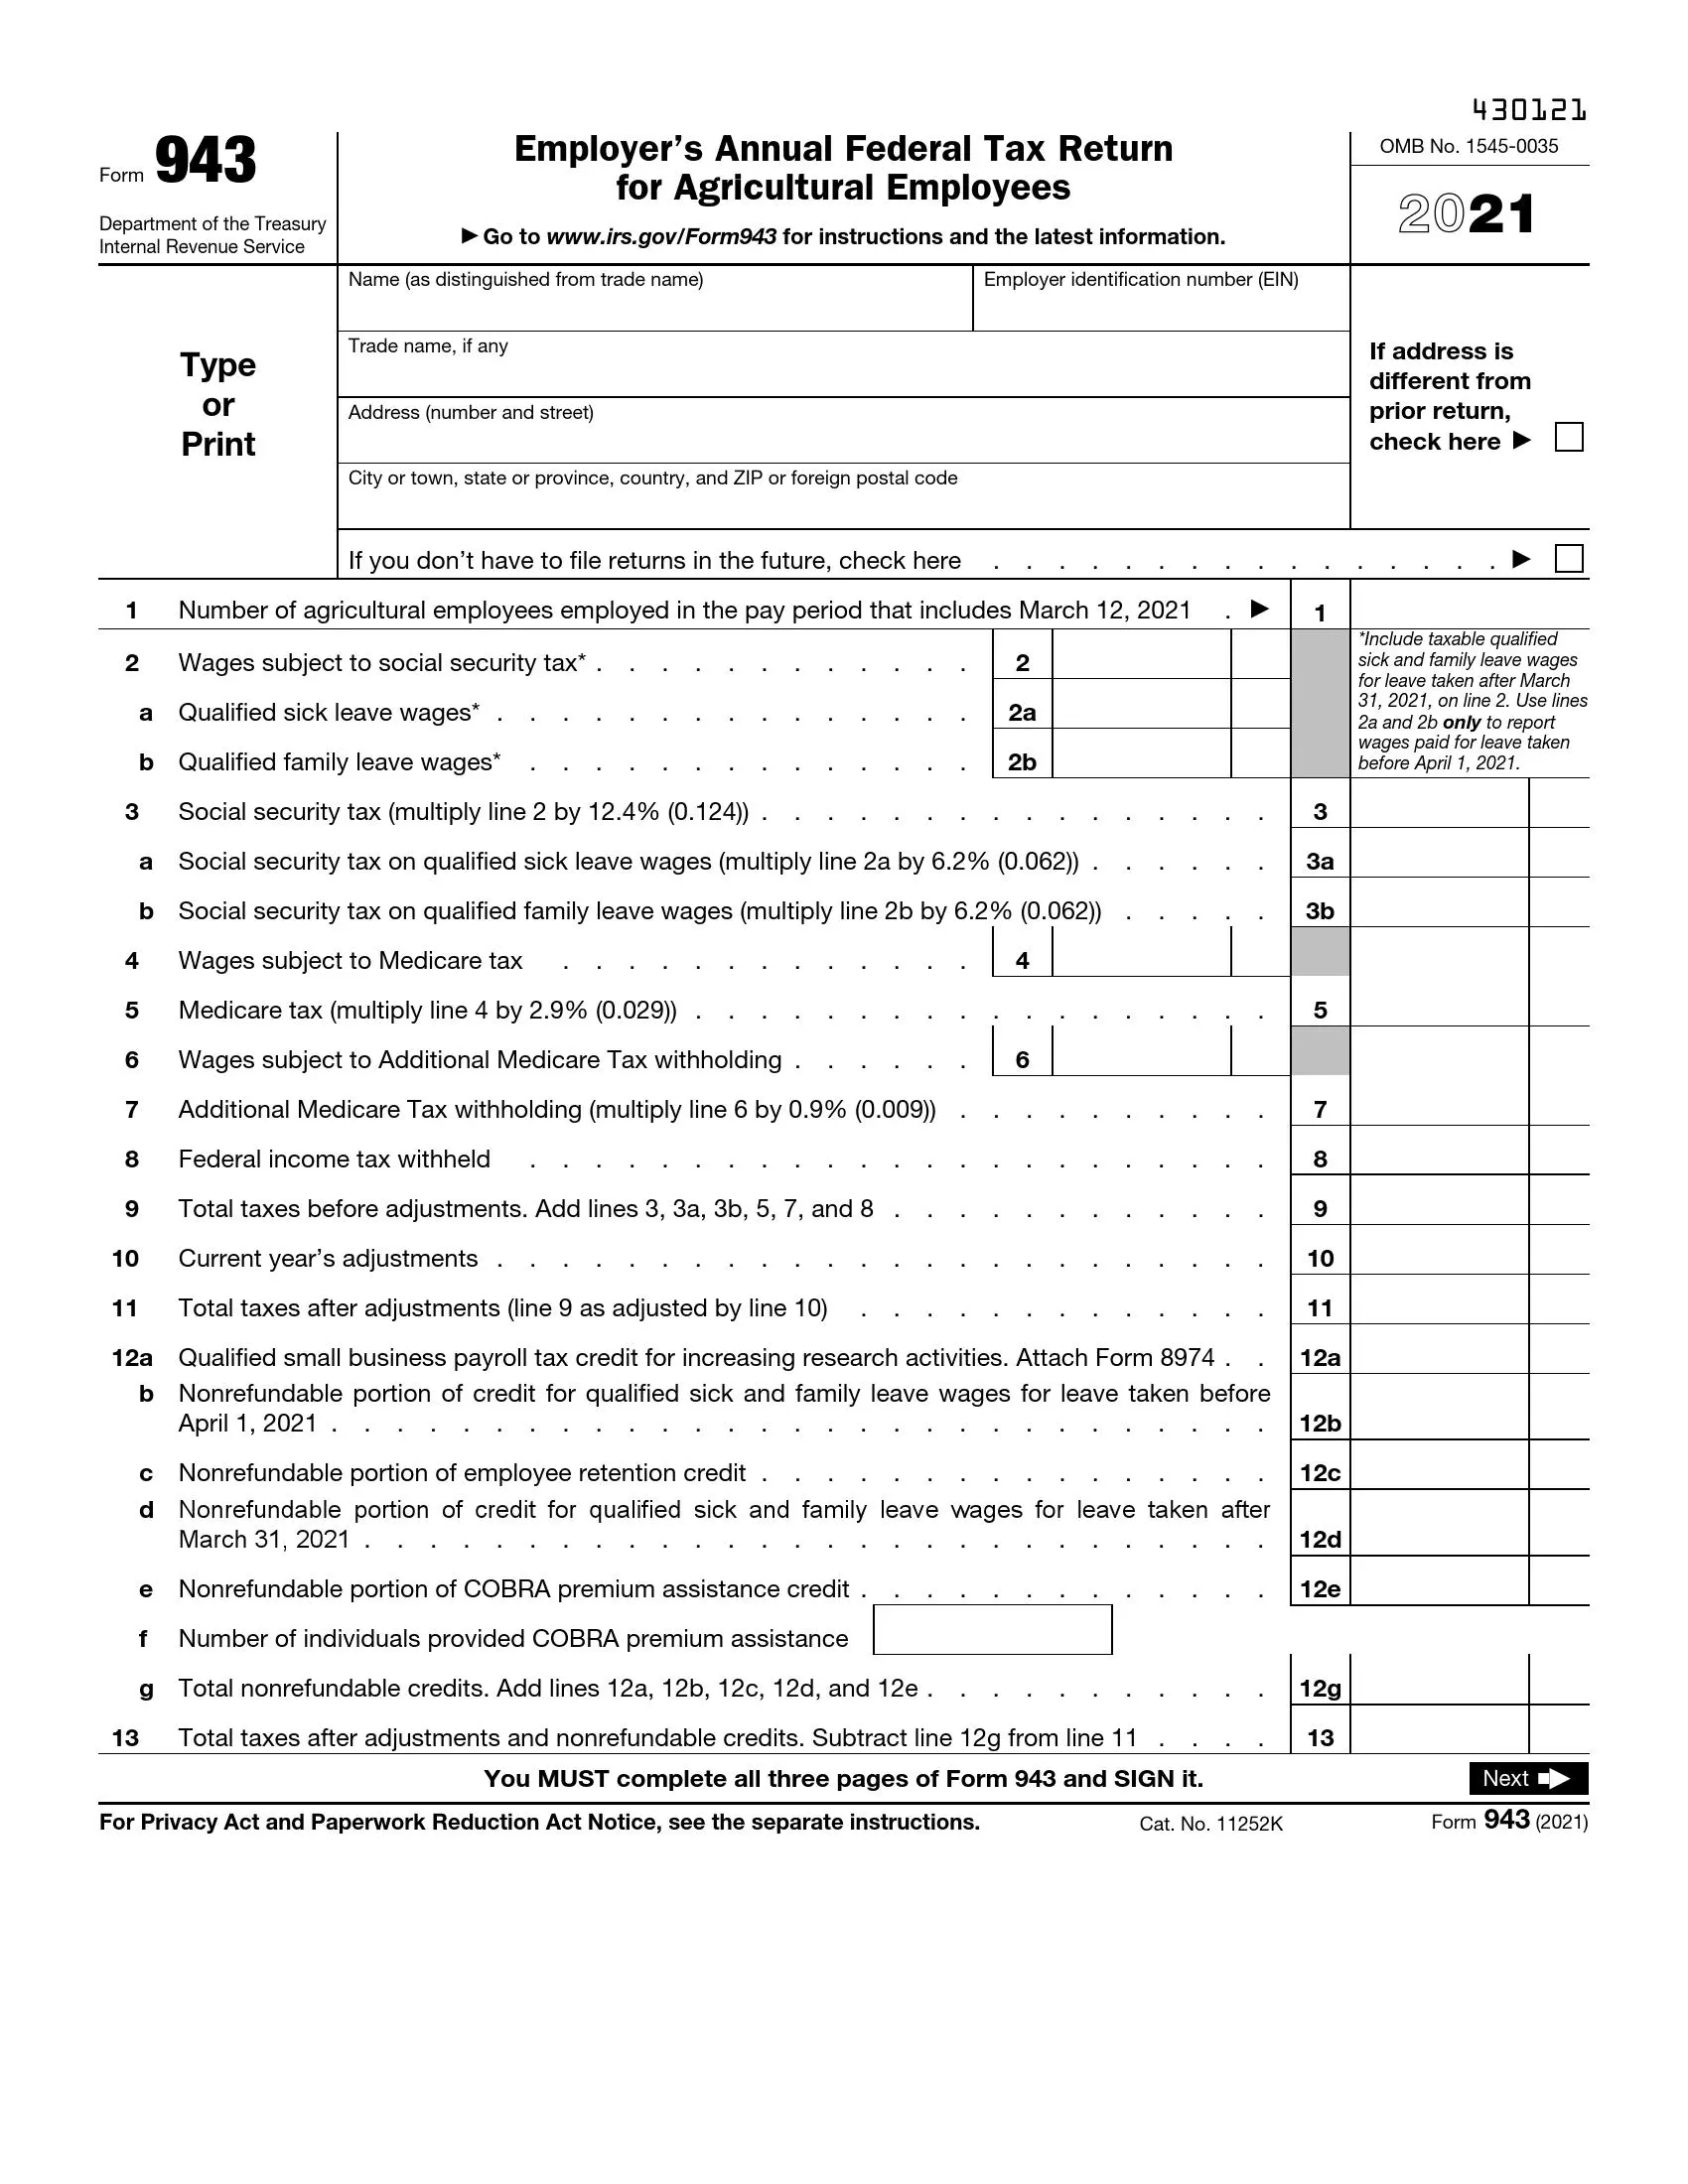 irs form 943 2021 preview